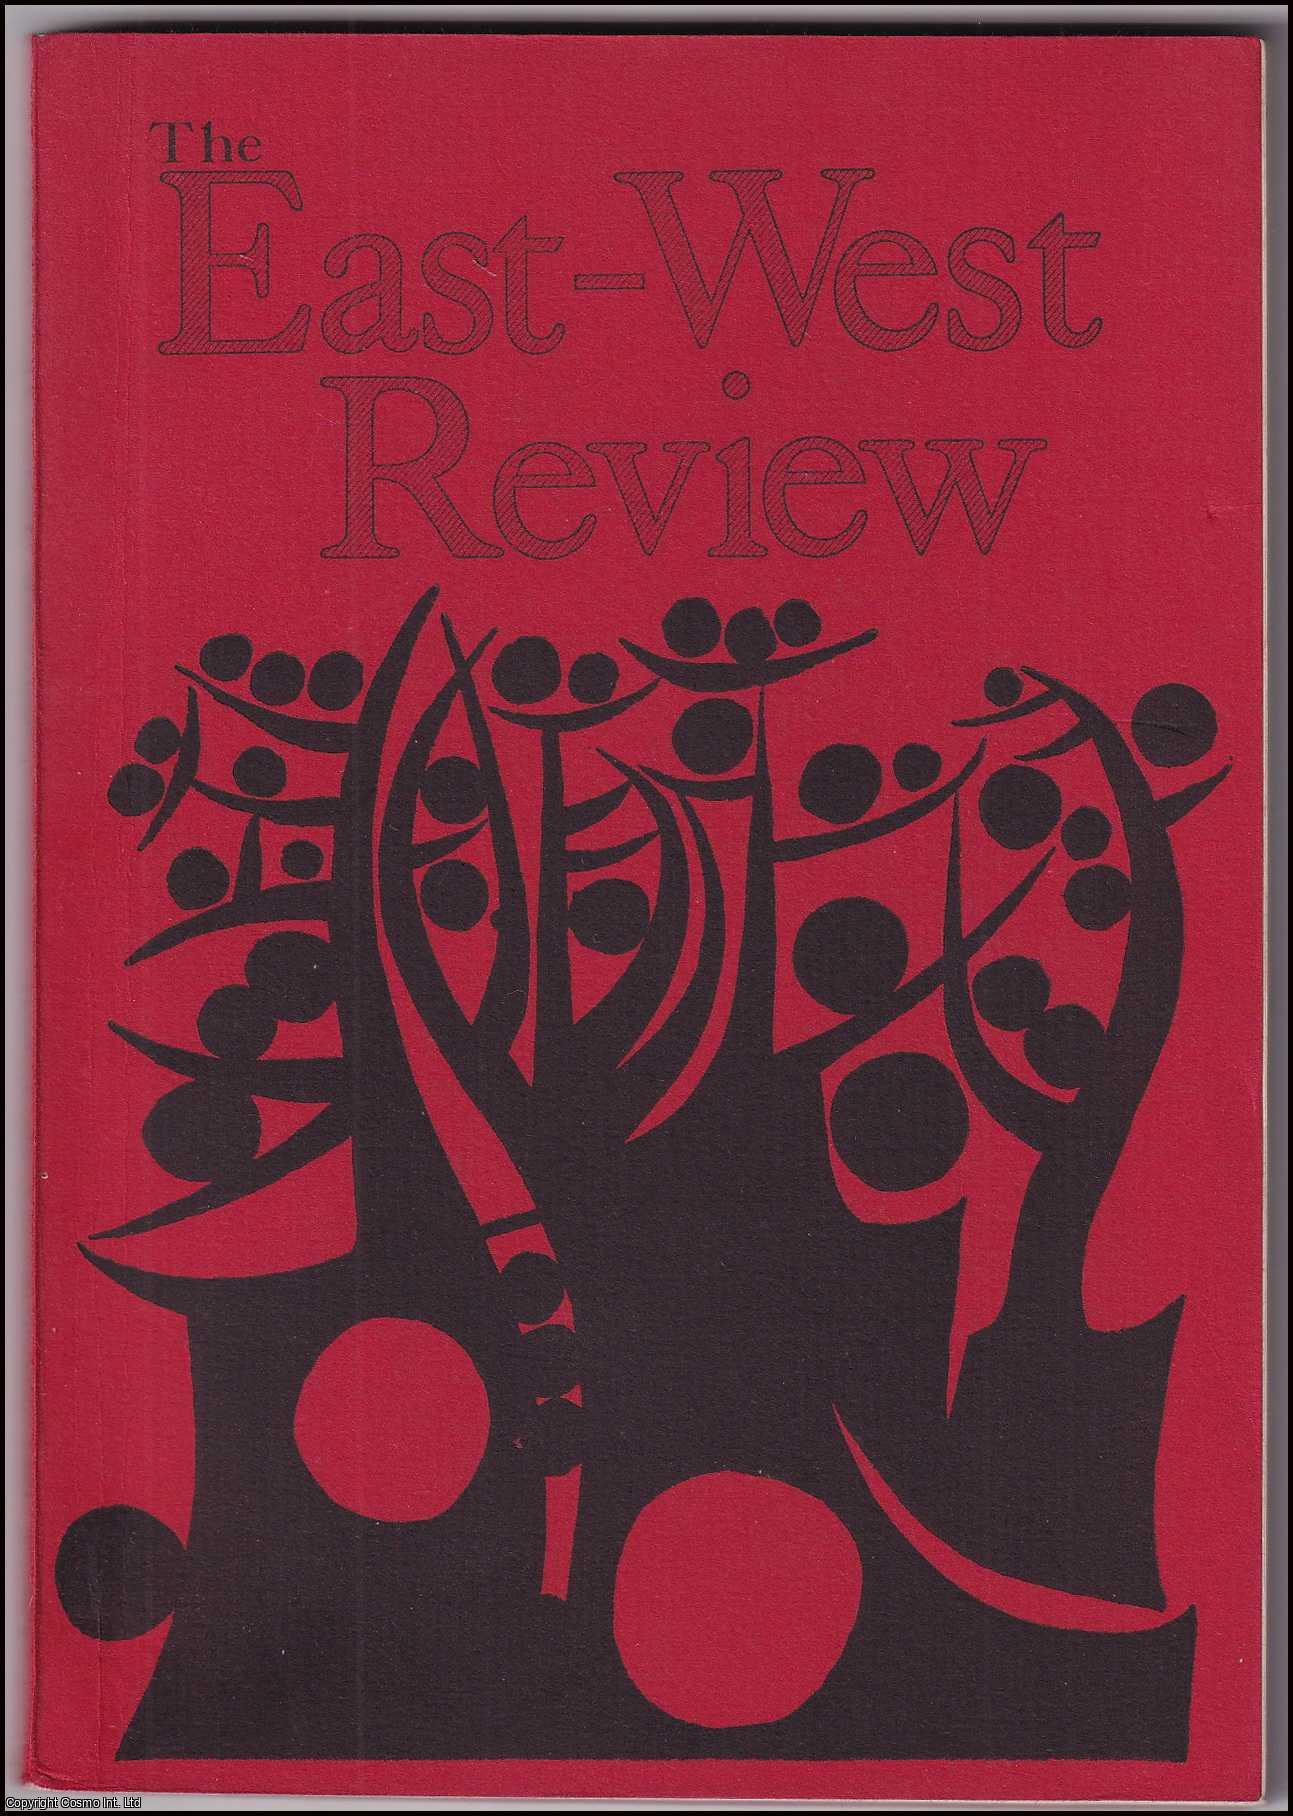 Edited by Naozo Ueno - The East-West Review. Autumn 1964. Volume 1, Number 2. Includes an Interview with Ezra Pound by Kojiro Yoshikawa. See pictures for contributors.